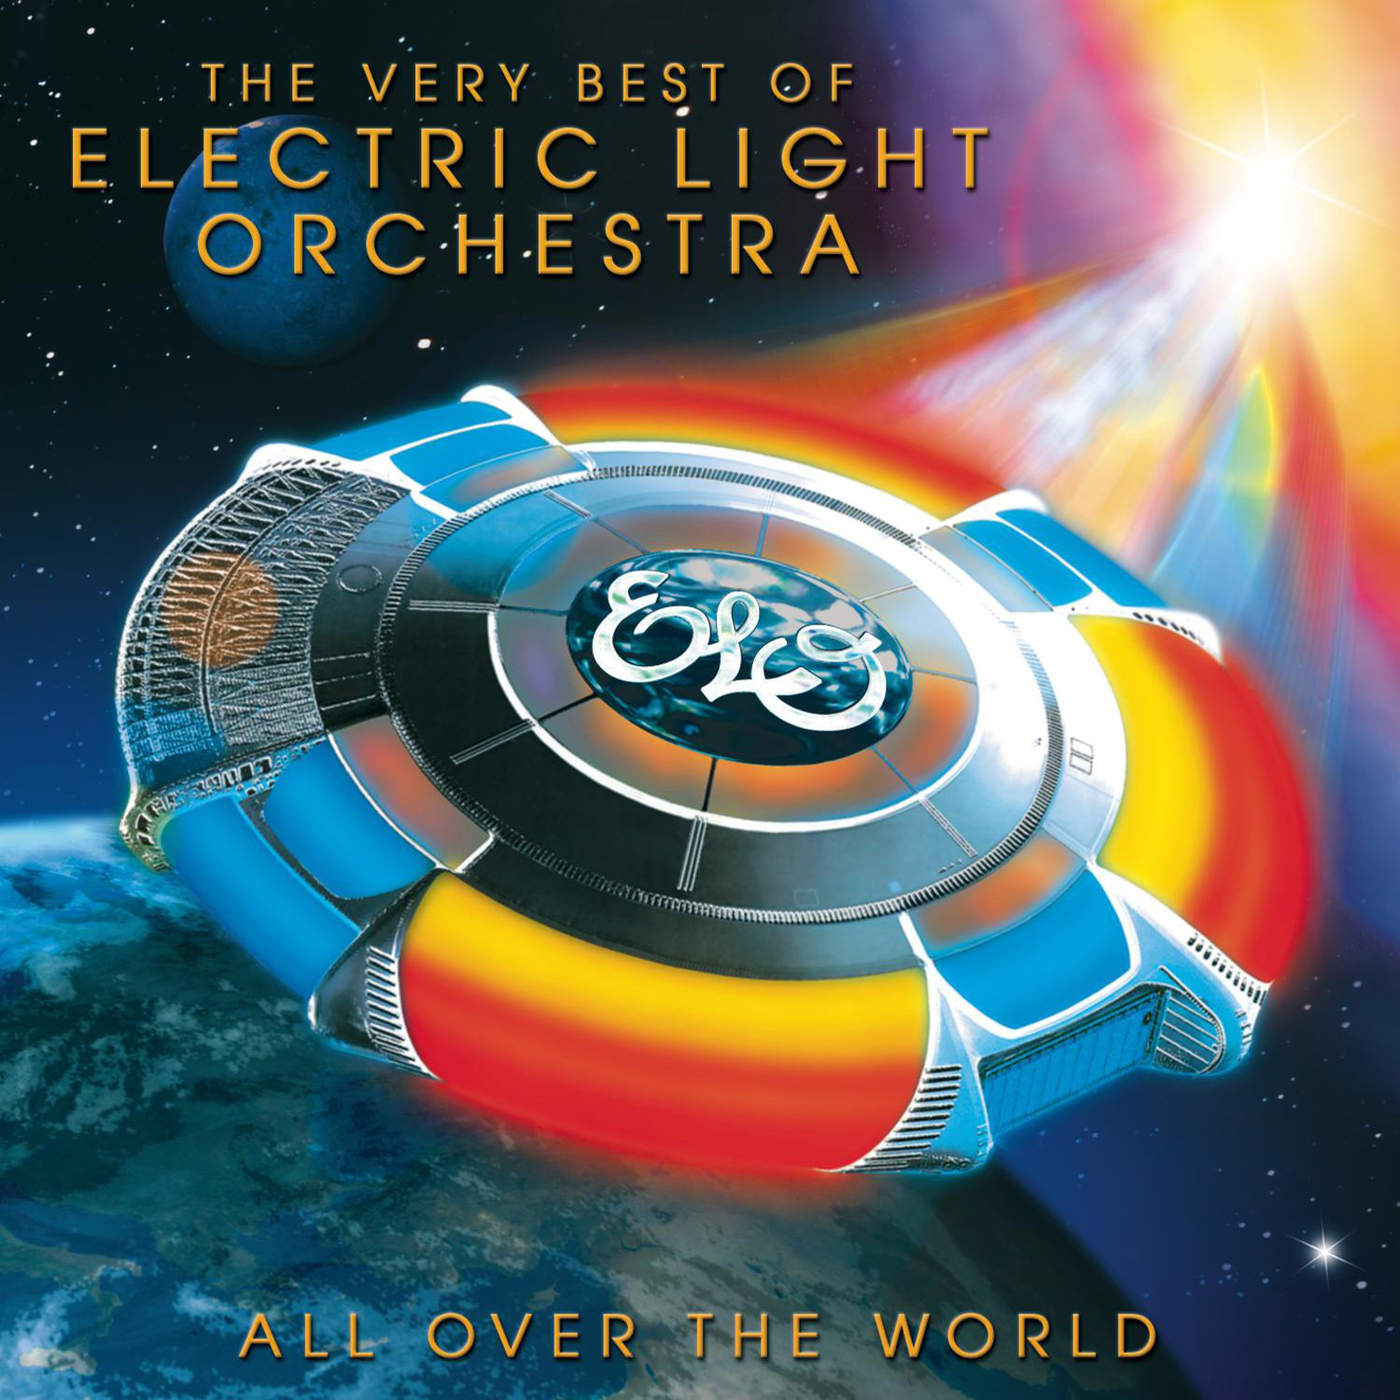 Art for Livin' Thing by Electric Light Orchestra